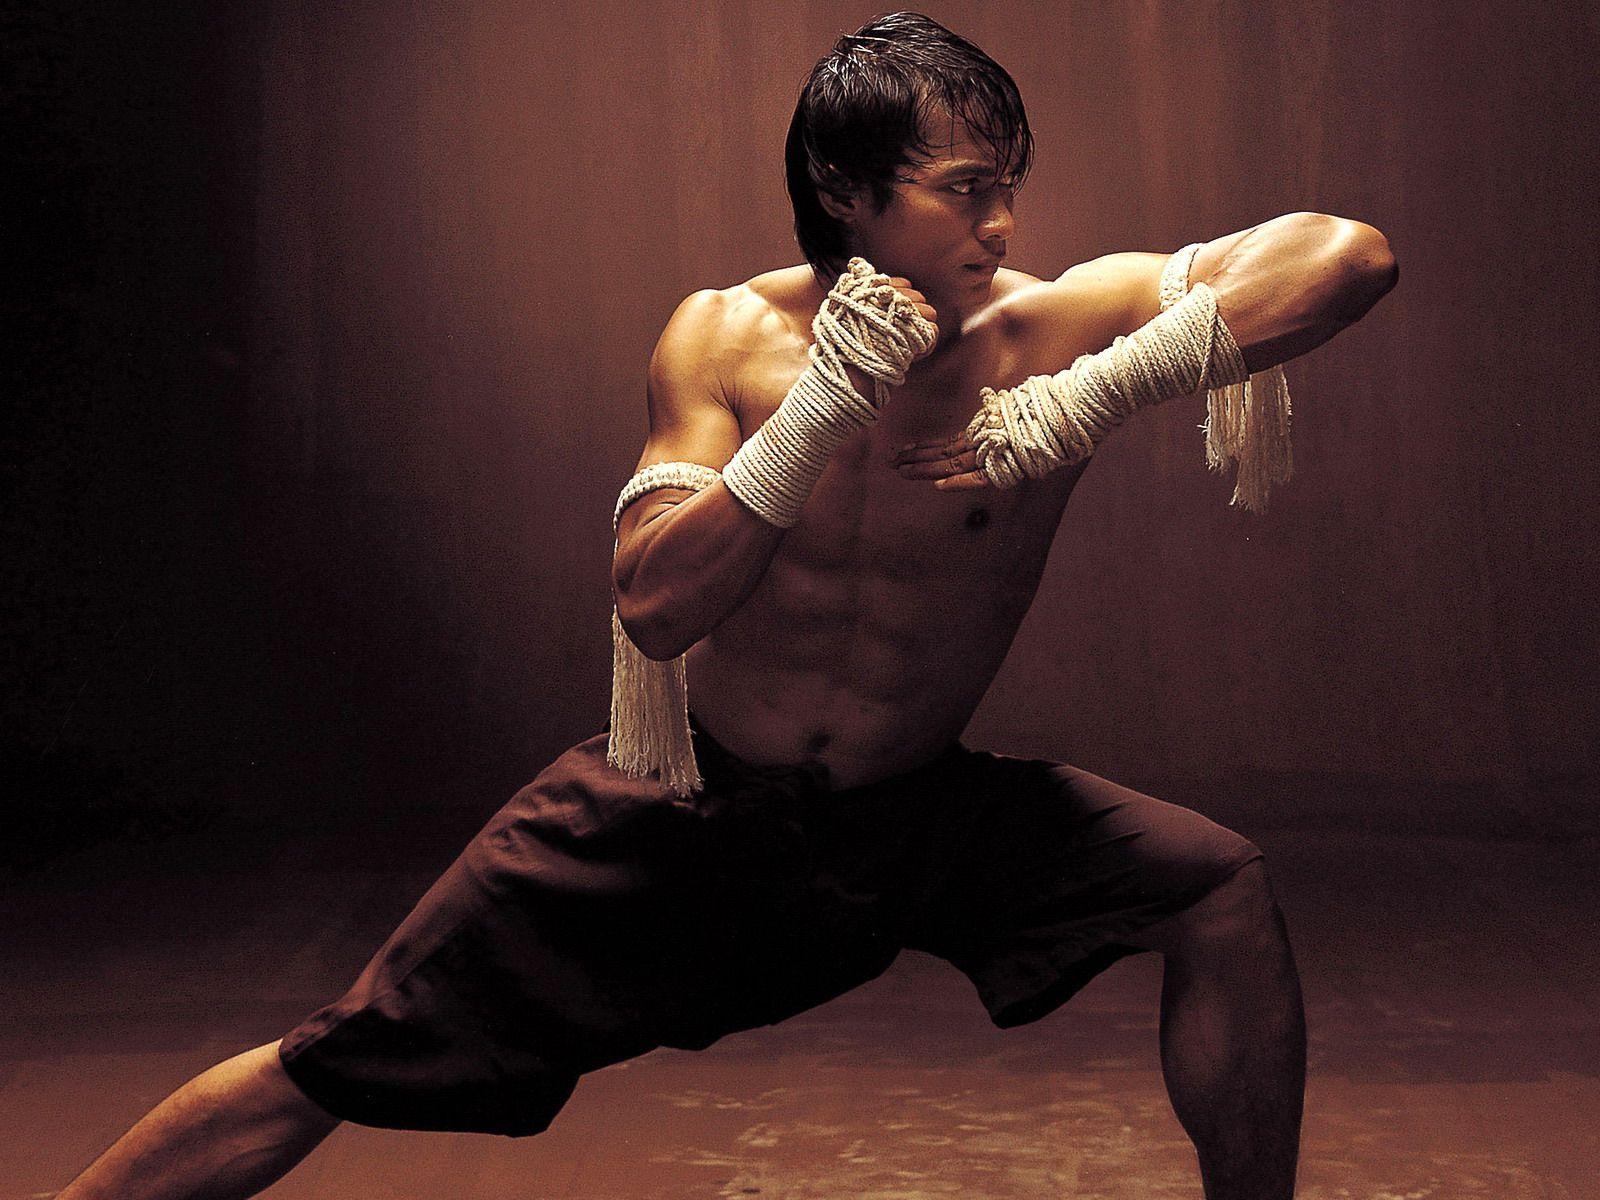 Ong Bak Wallpaper And Image, Picture, Photo